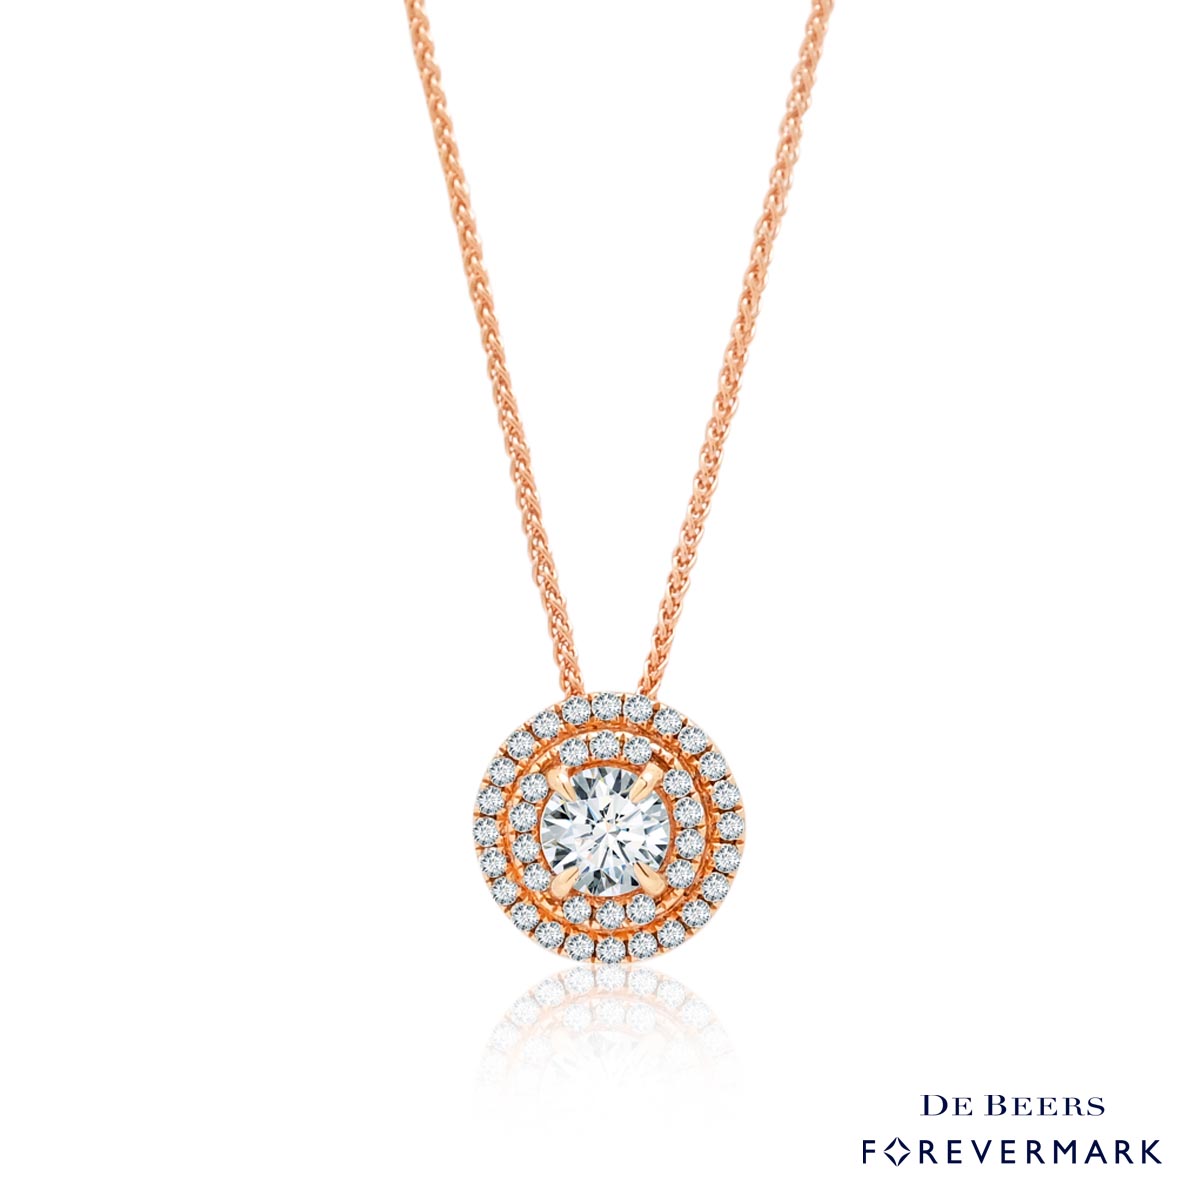 De Beers Forevermark Center of My Universe Diamond Necklace in 18kt Rose  Gold (1/3ct tw)